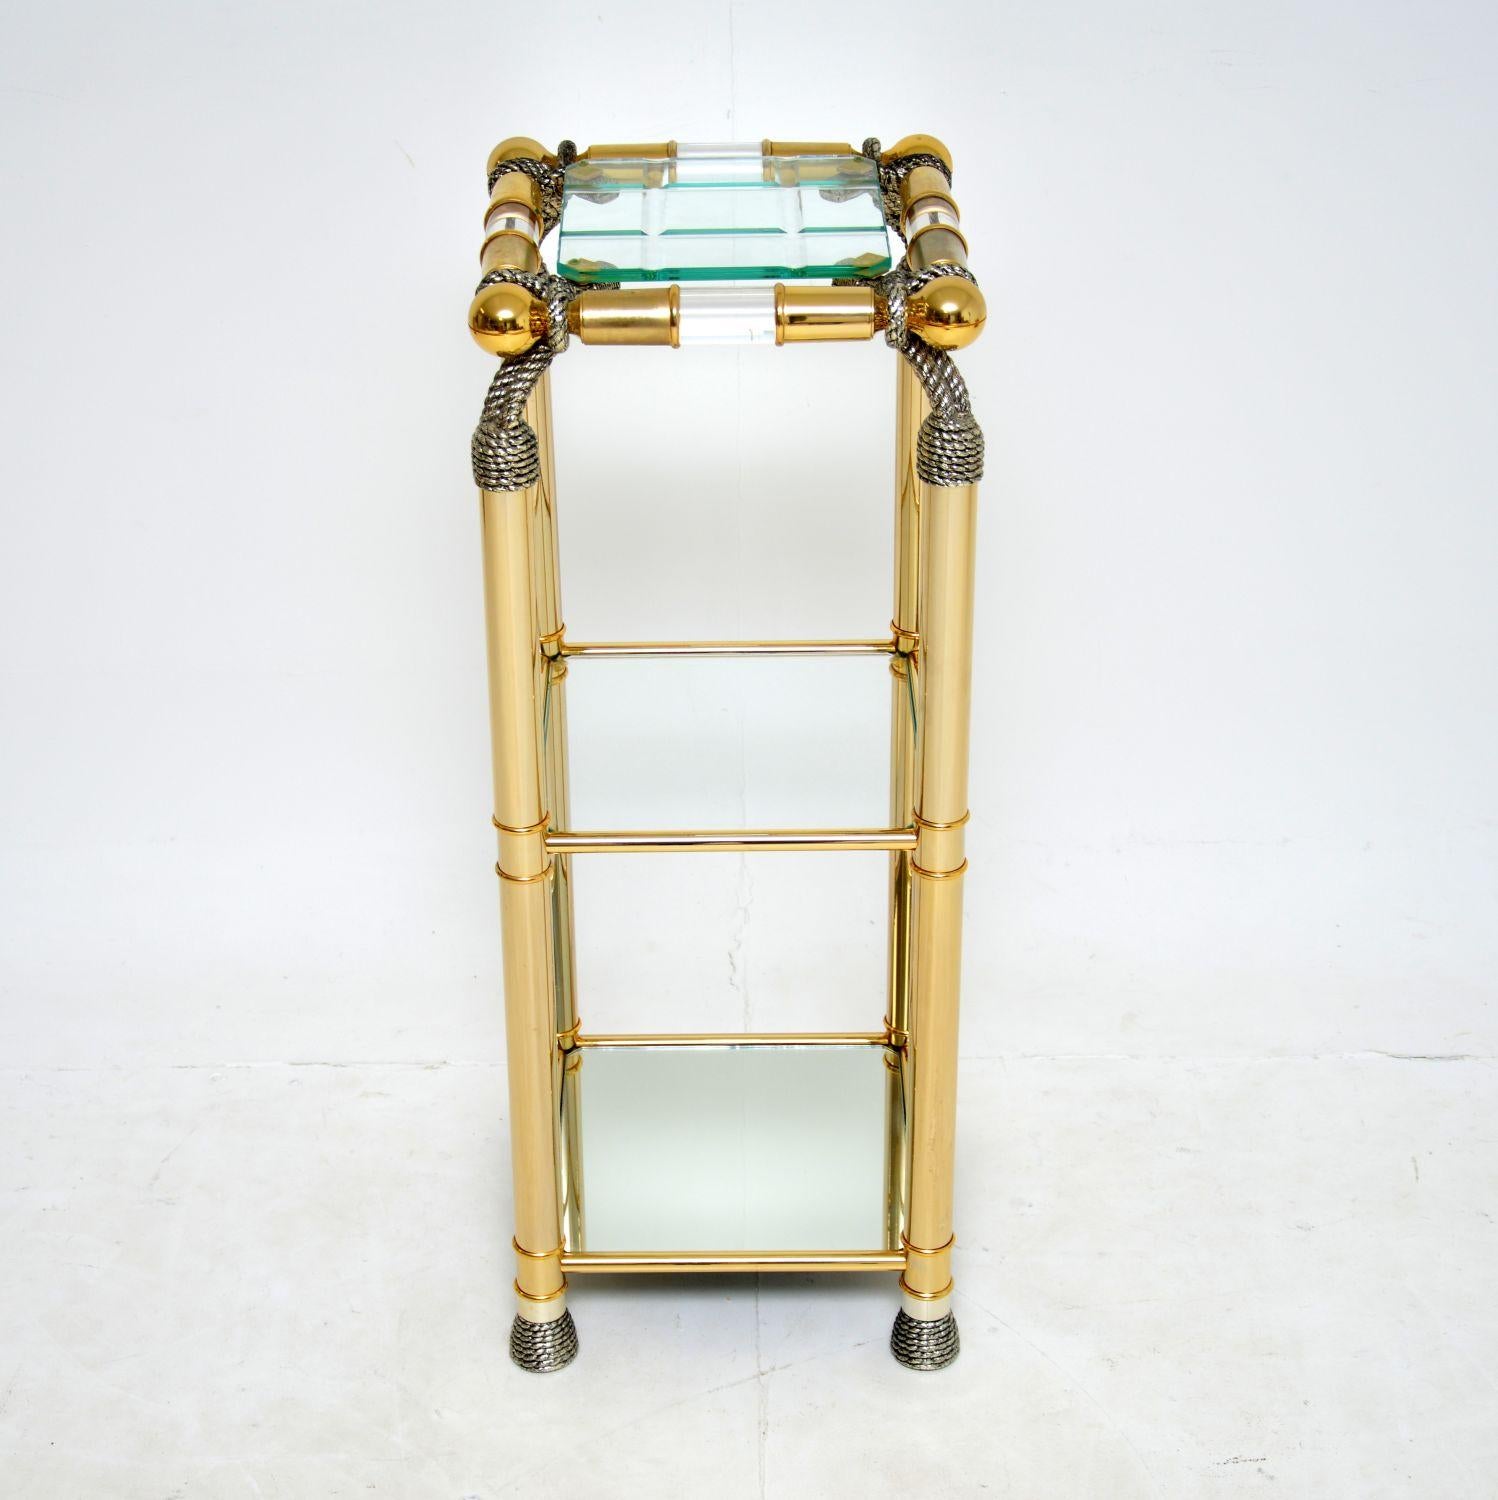 A stunning vintage decorative side table in acrylic and glass. This was made in Spain, it dates from around the 1970’s.

The quality is excellent, this is tall and slim, it is a very useful size. The top tier is removable thick clear and grooved